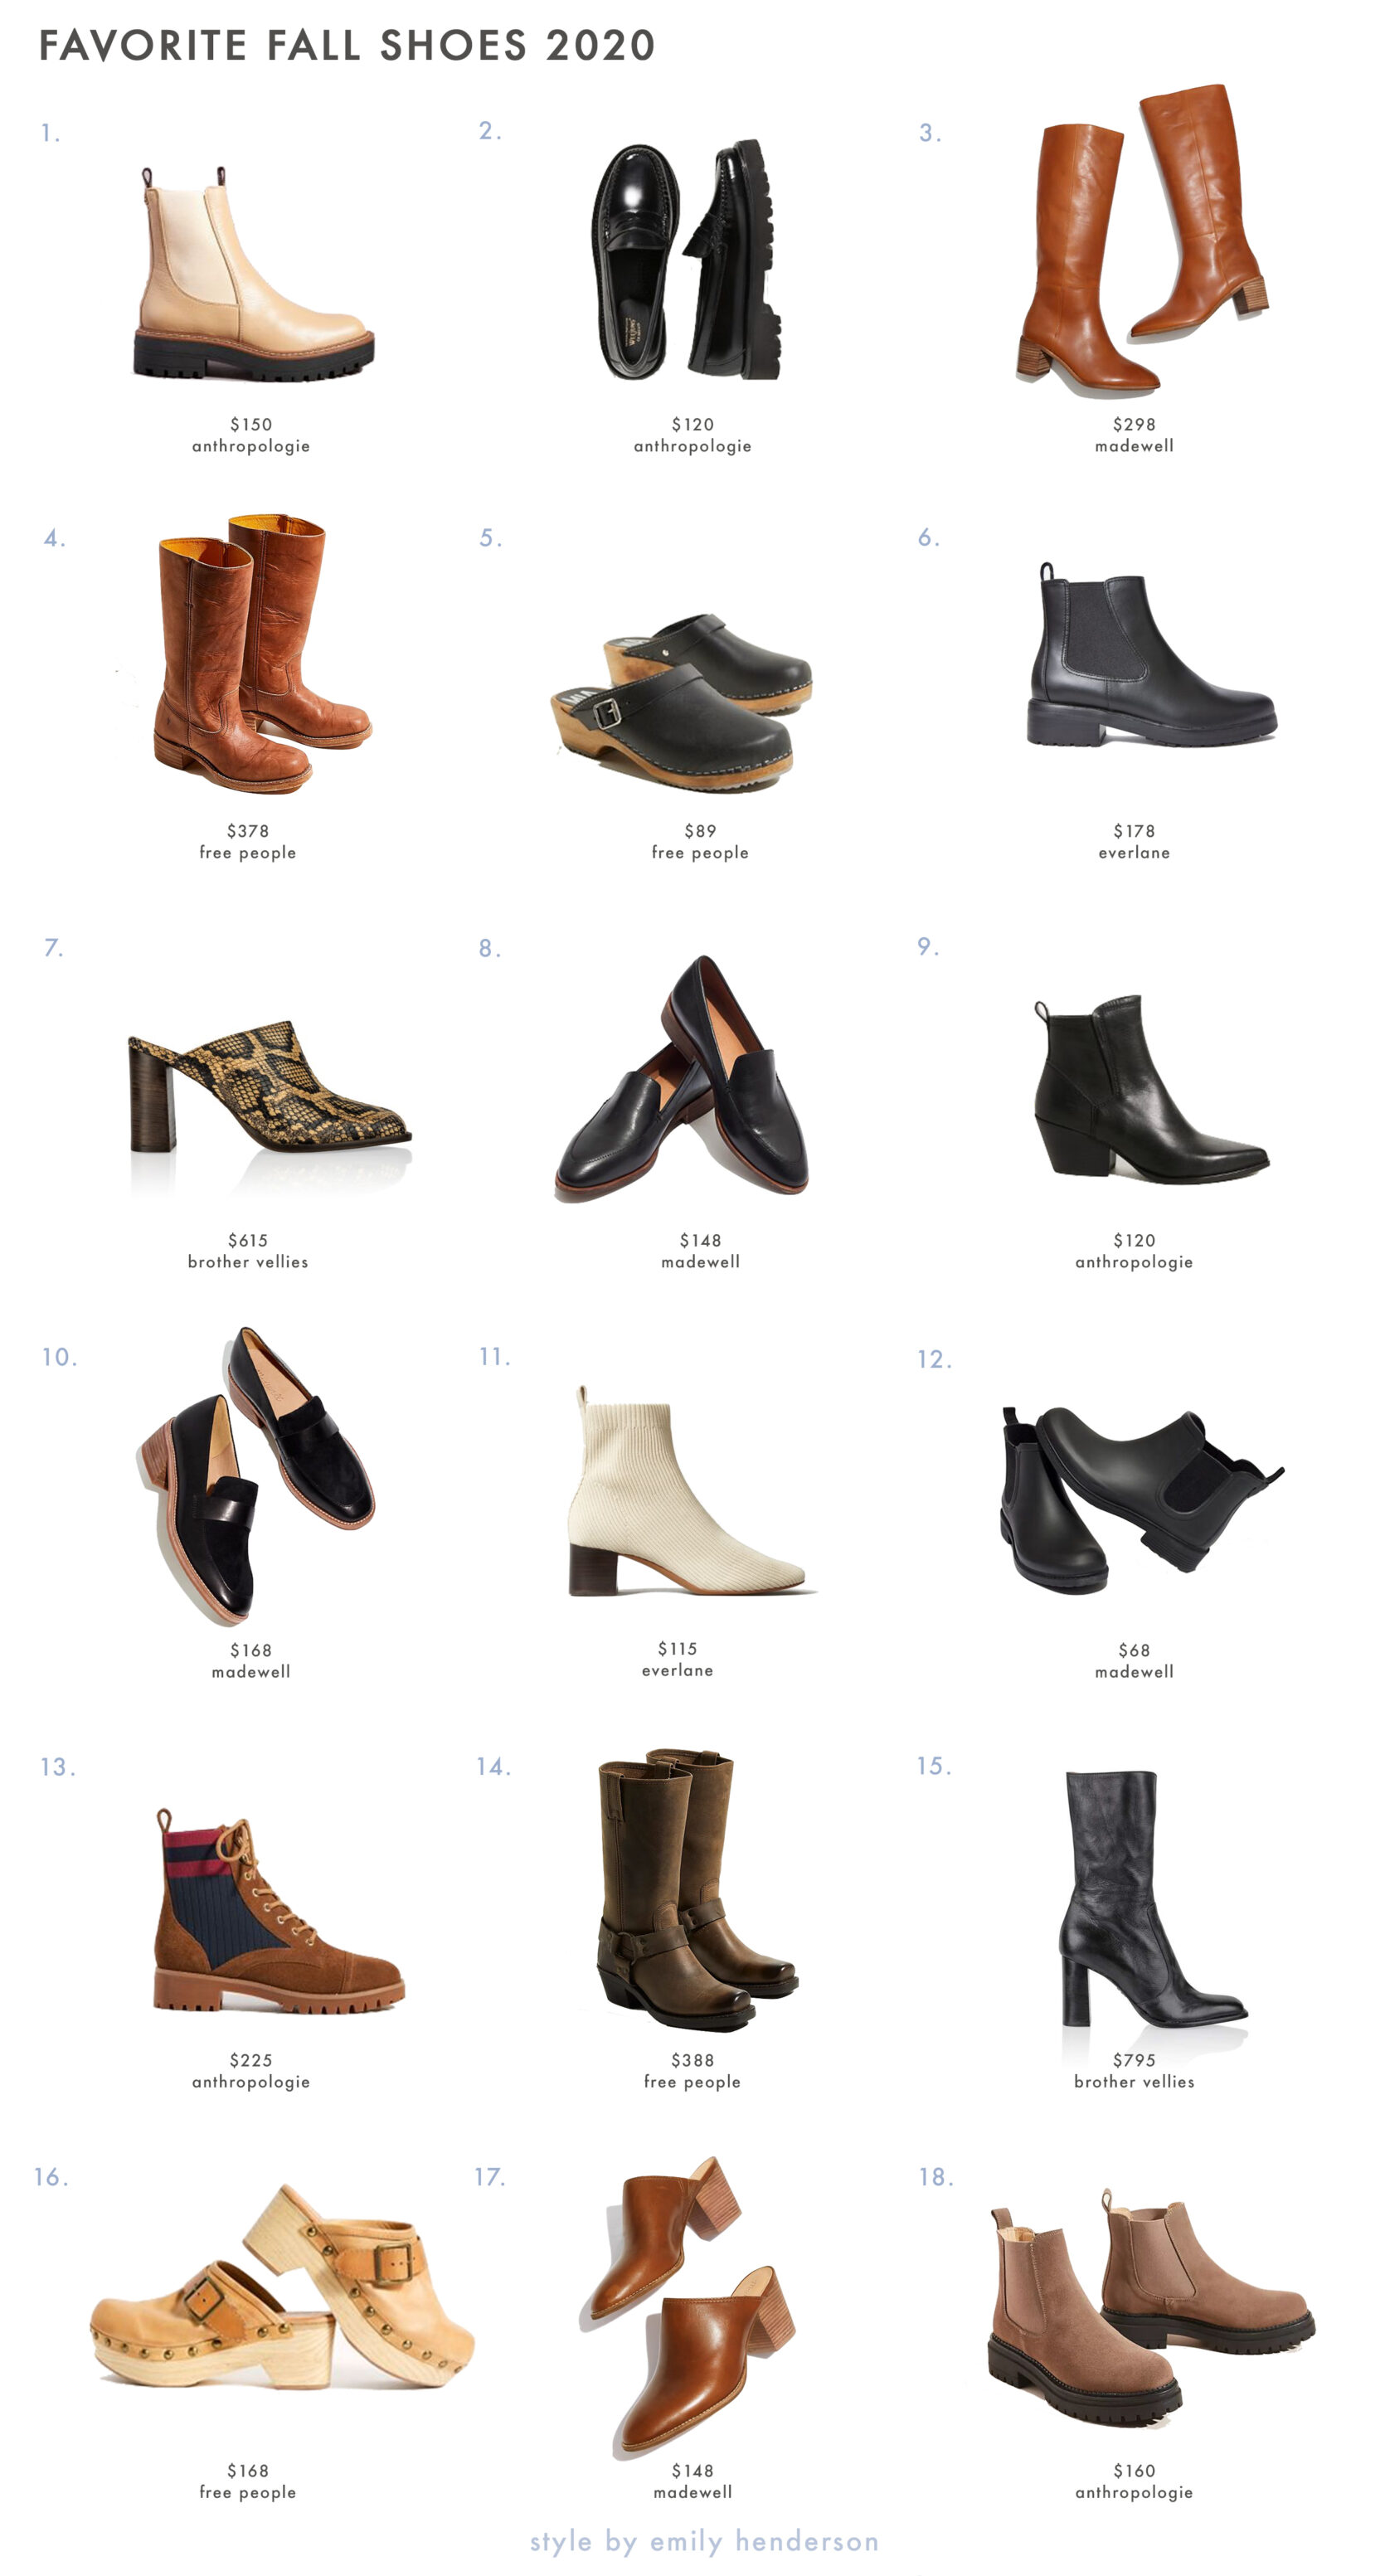 My Ultimate List Of Tried And True Fall Shoes (That I Wear Season After Season)